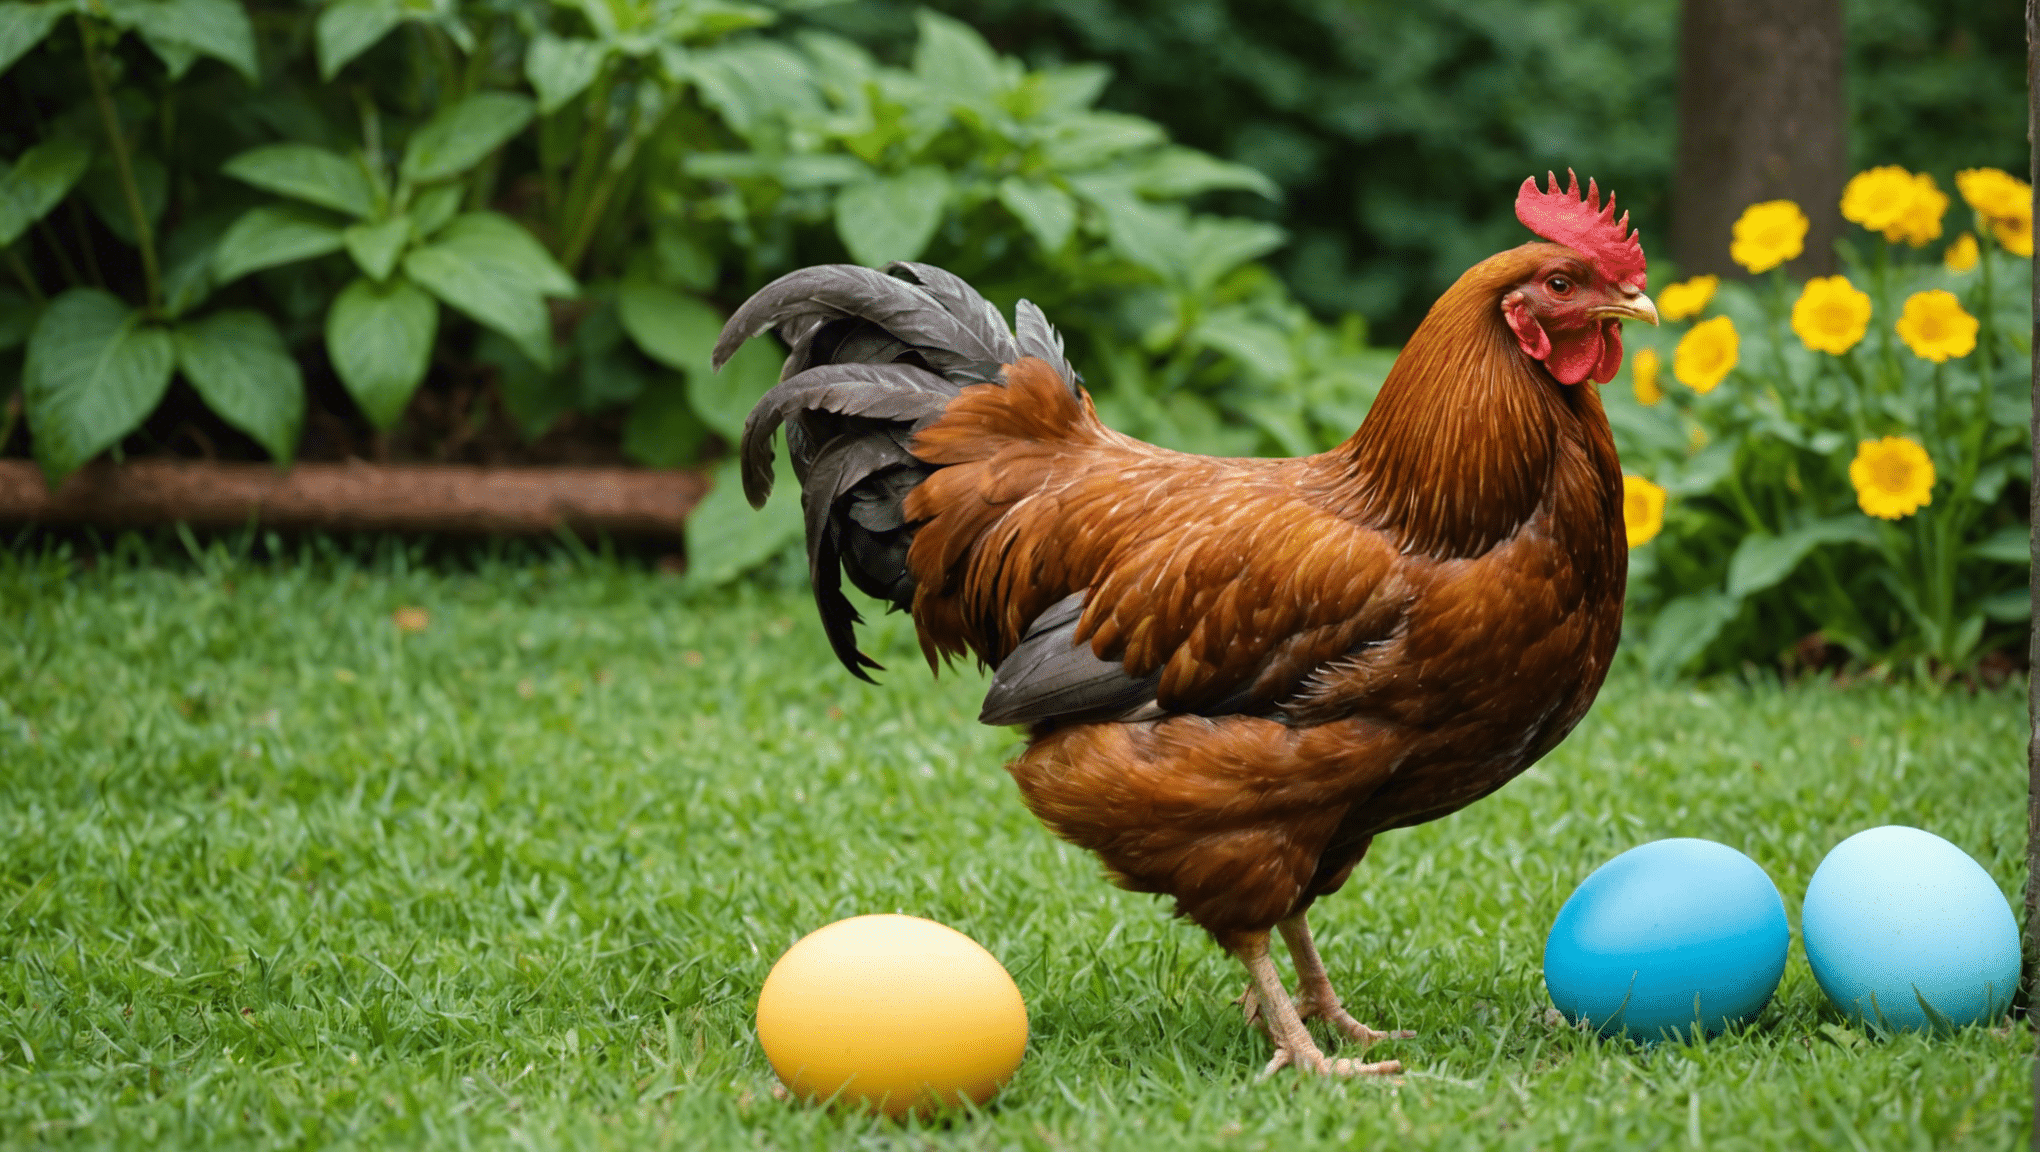 learn about the egg-laying age of various chicken breeds and how to determine when they will start producing eggs.